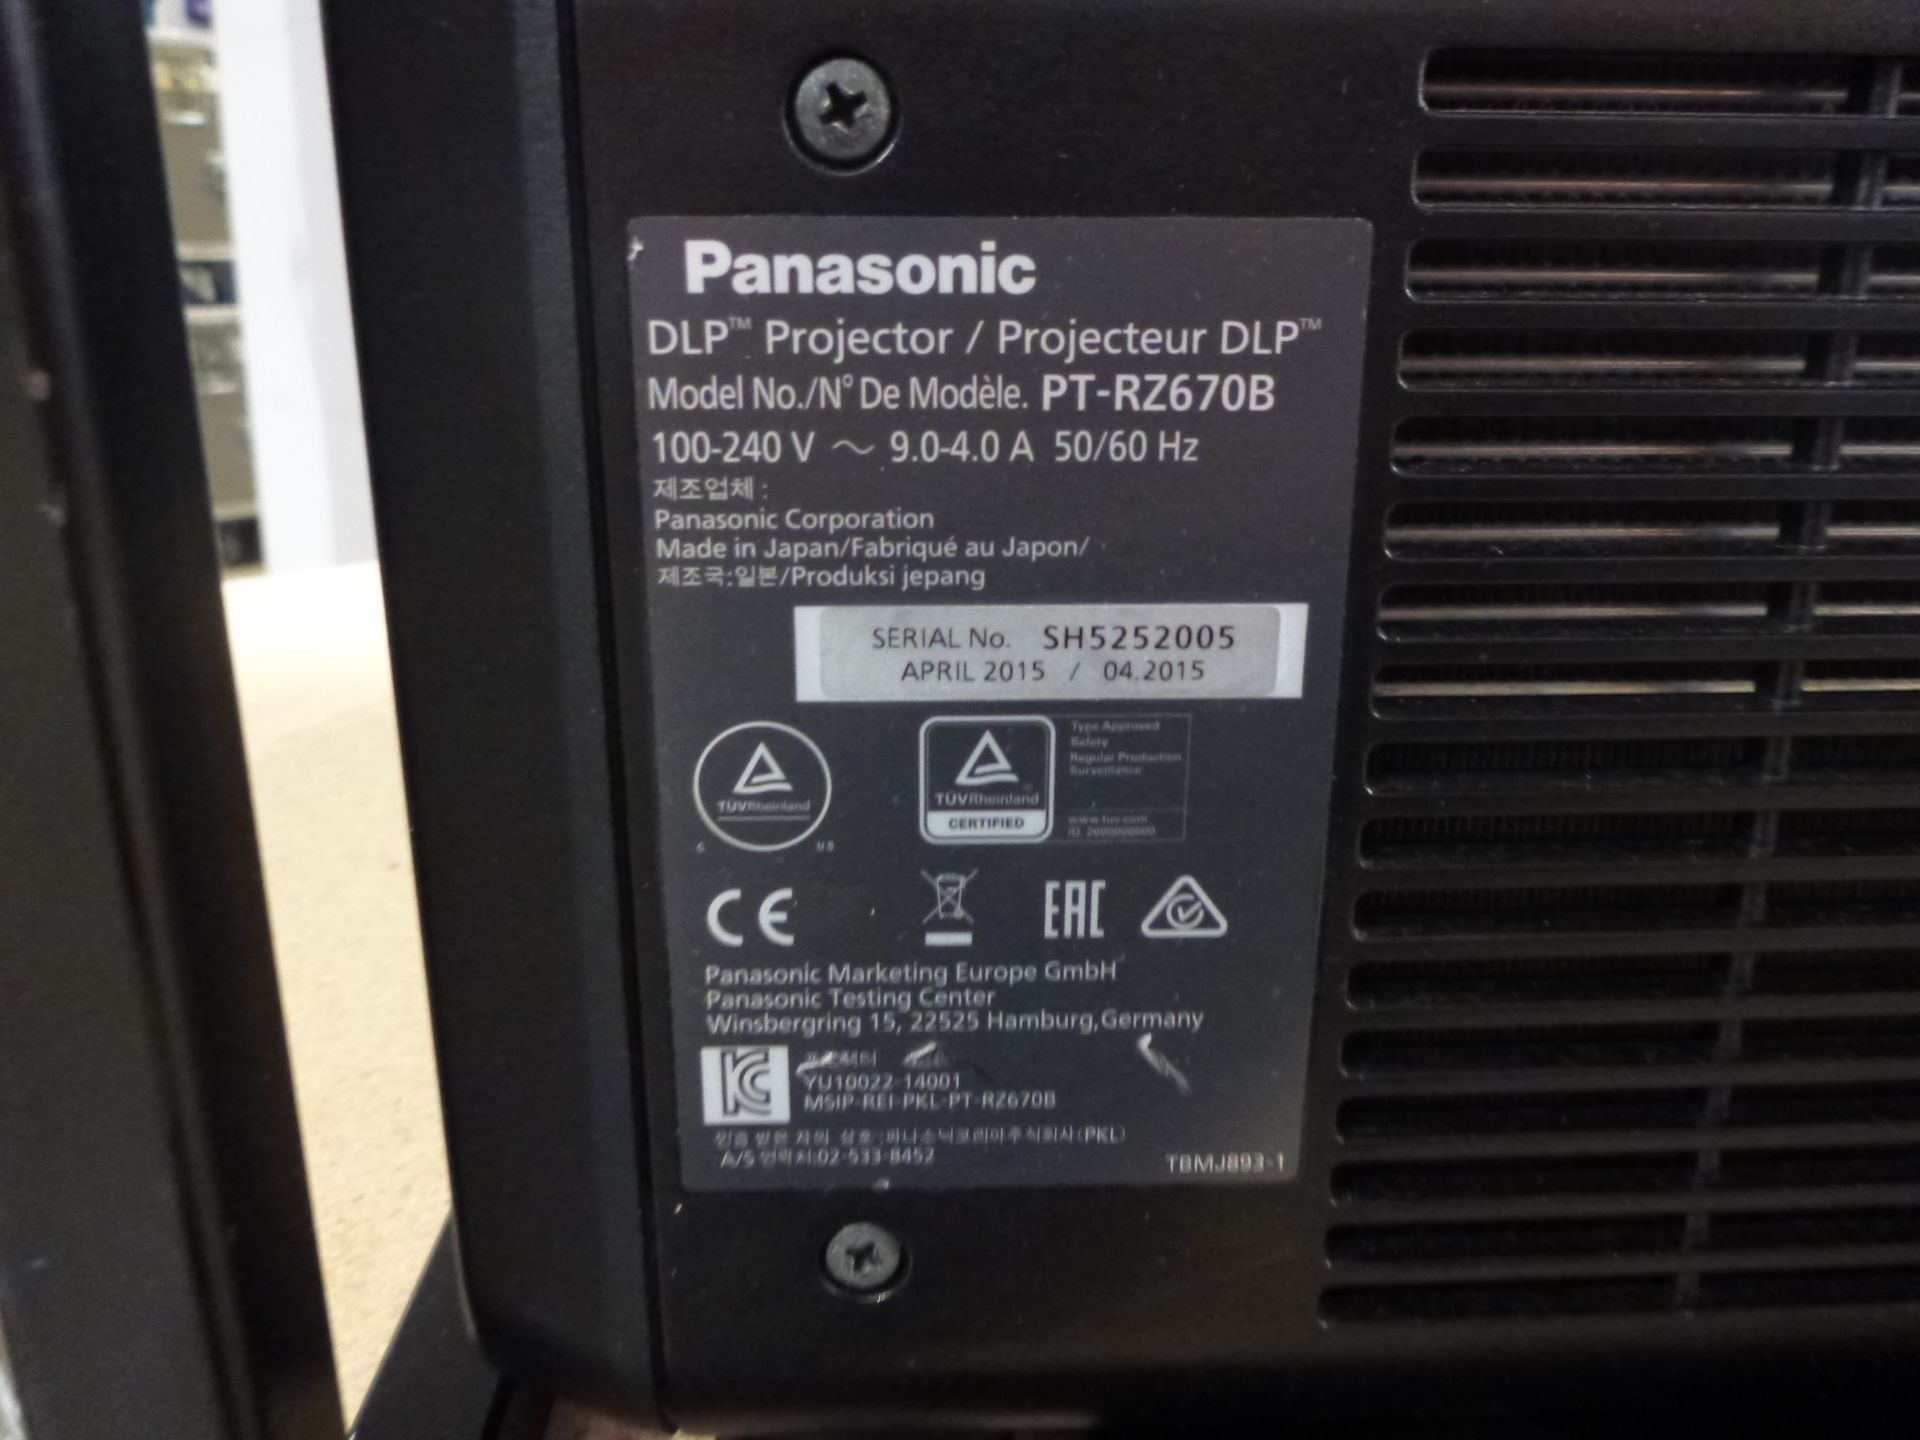 Panasonic Laser Projector, Model PT-RZ670, S/N SH5252005, YOM 2015, In flight case with standard 1. - Image 3 of 11